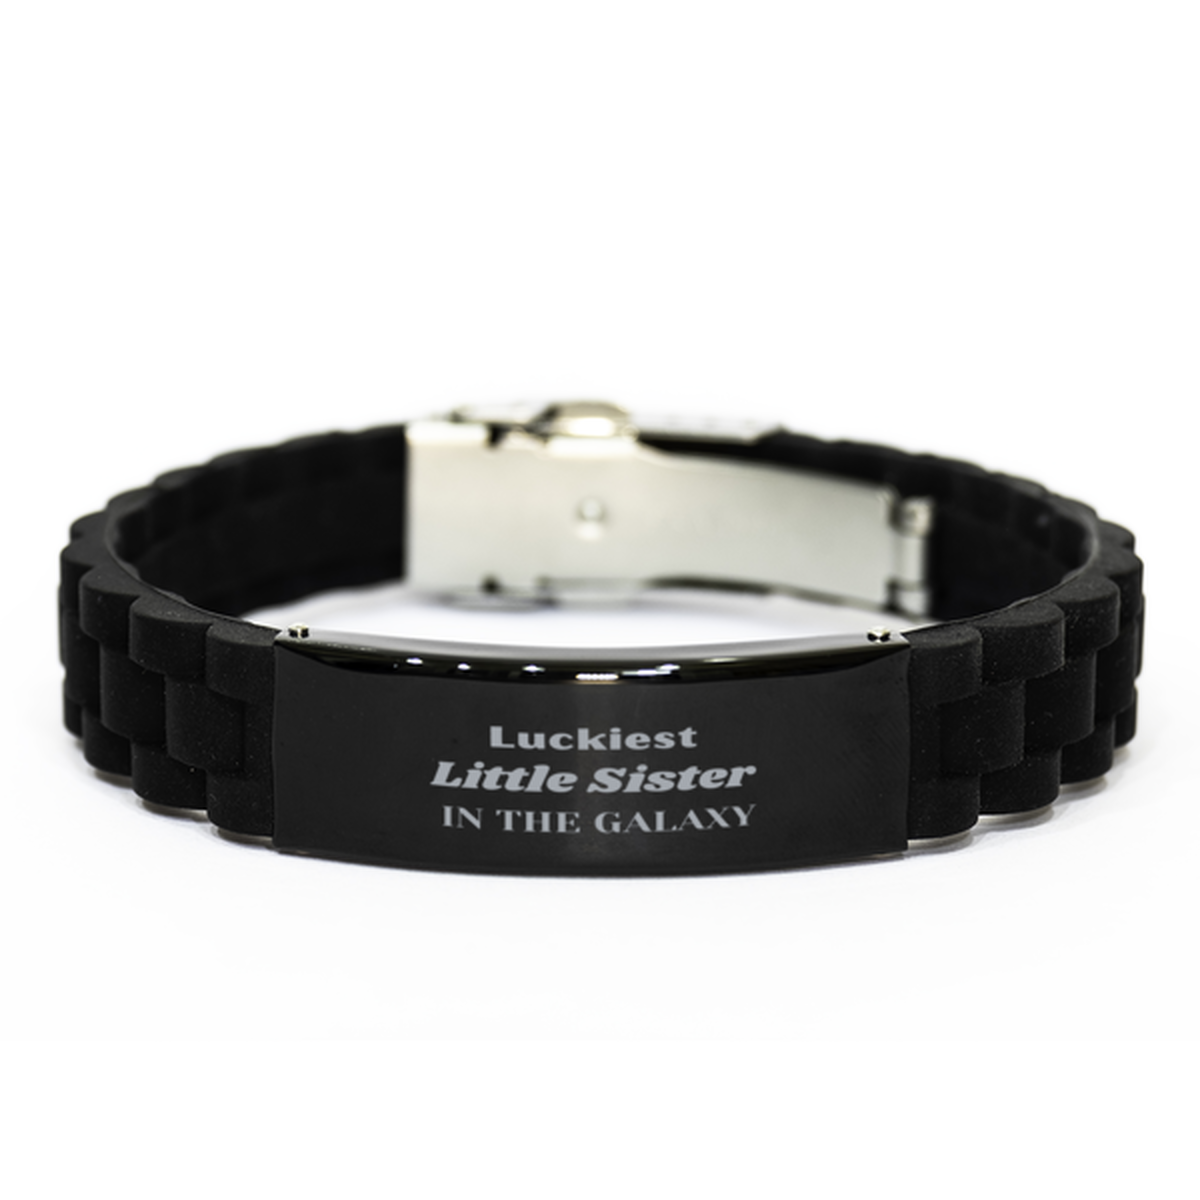 Luckiest Little Sister in the Galaxy, To My Little Sister Engraved Gifts, Christmas Little Sister Black Glidelock Clasp Bracelet Gifts, X-mas Birthday Unique Gifts For Little Sister Men Women